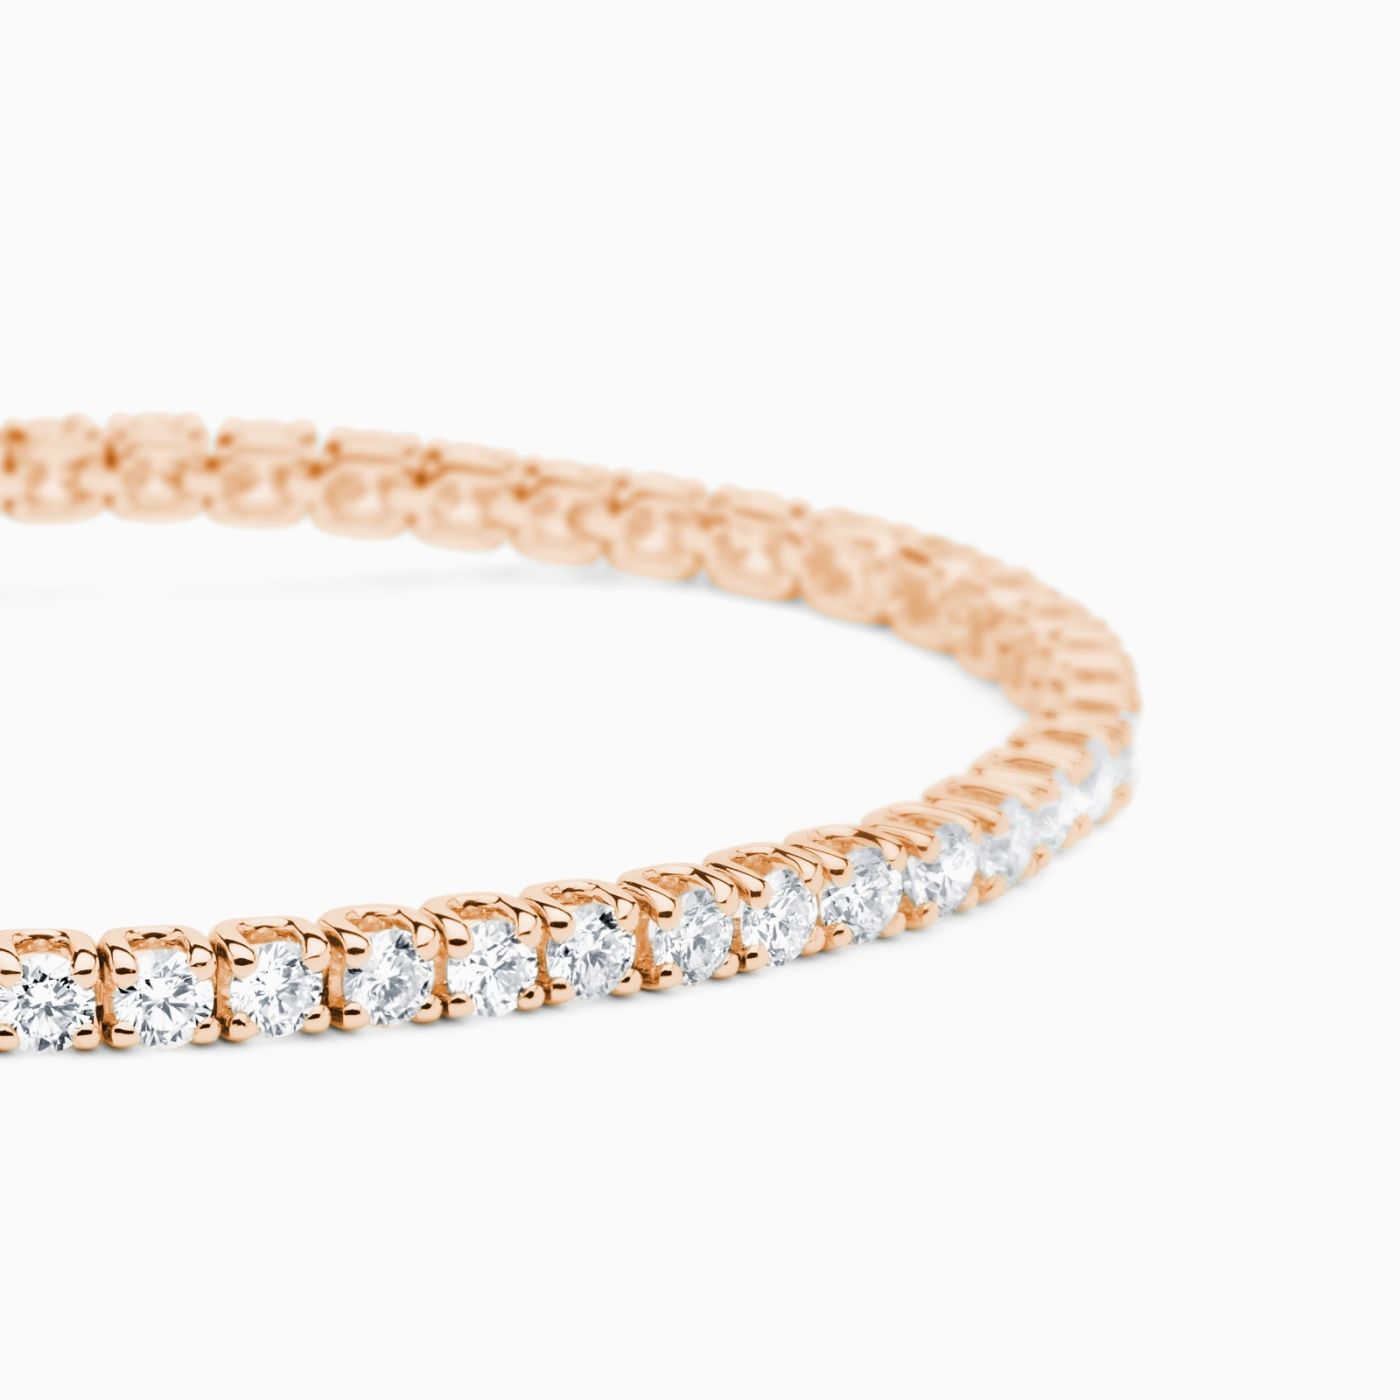 Bracelet riviere in pink gold with diamonds